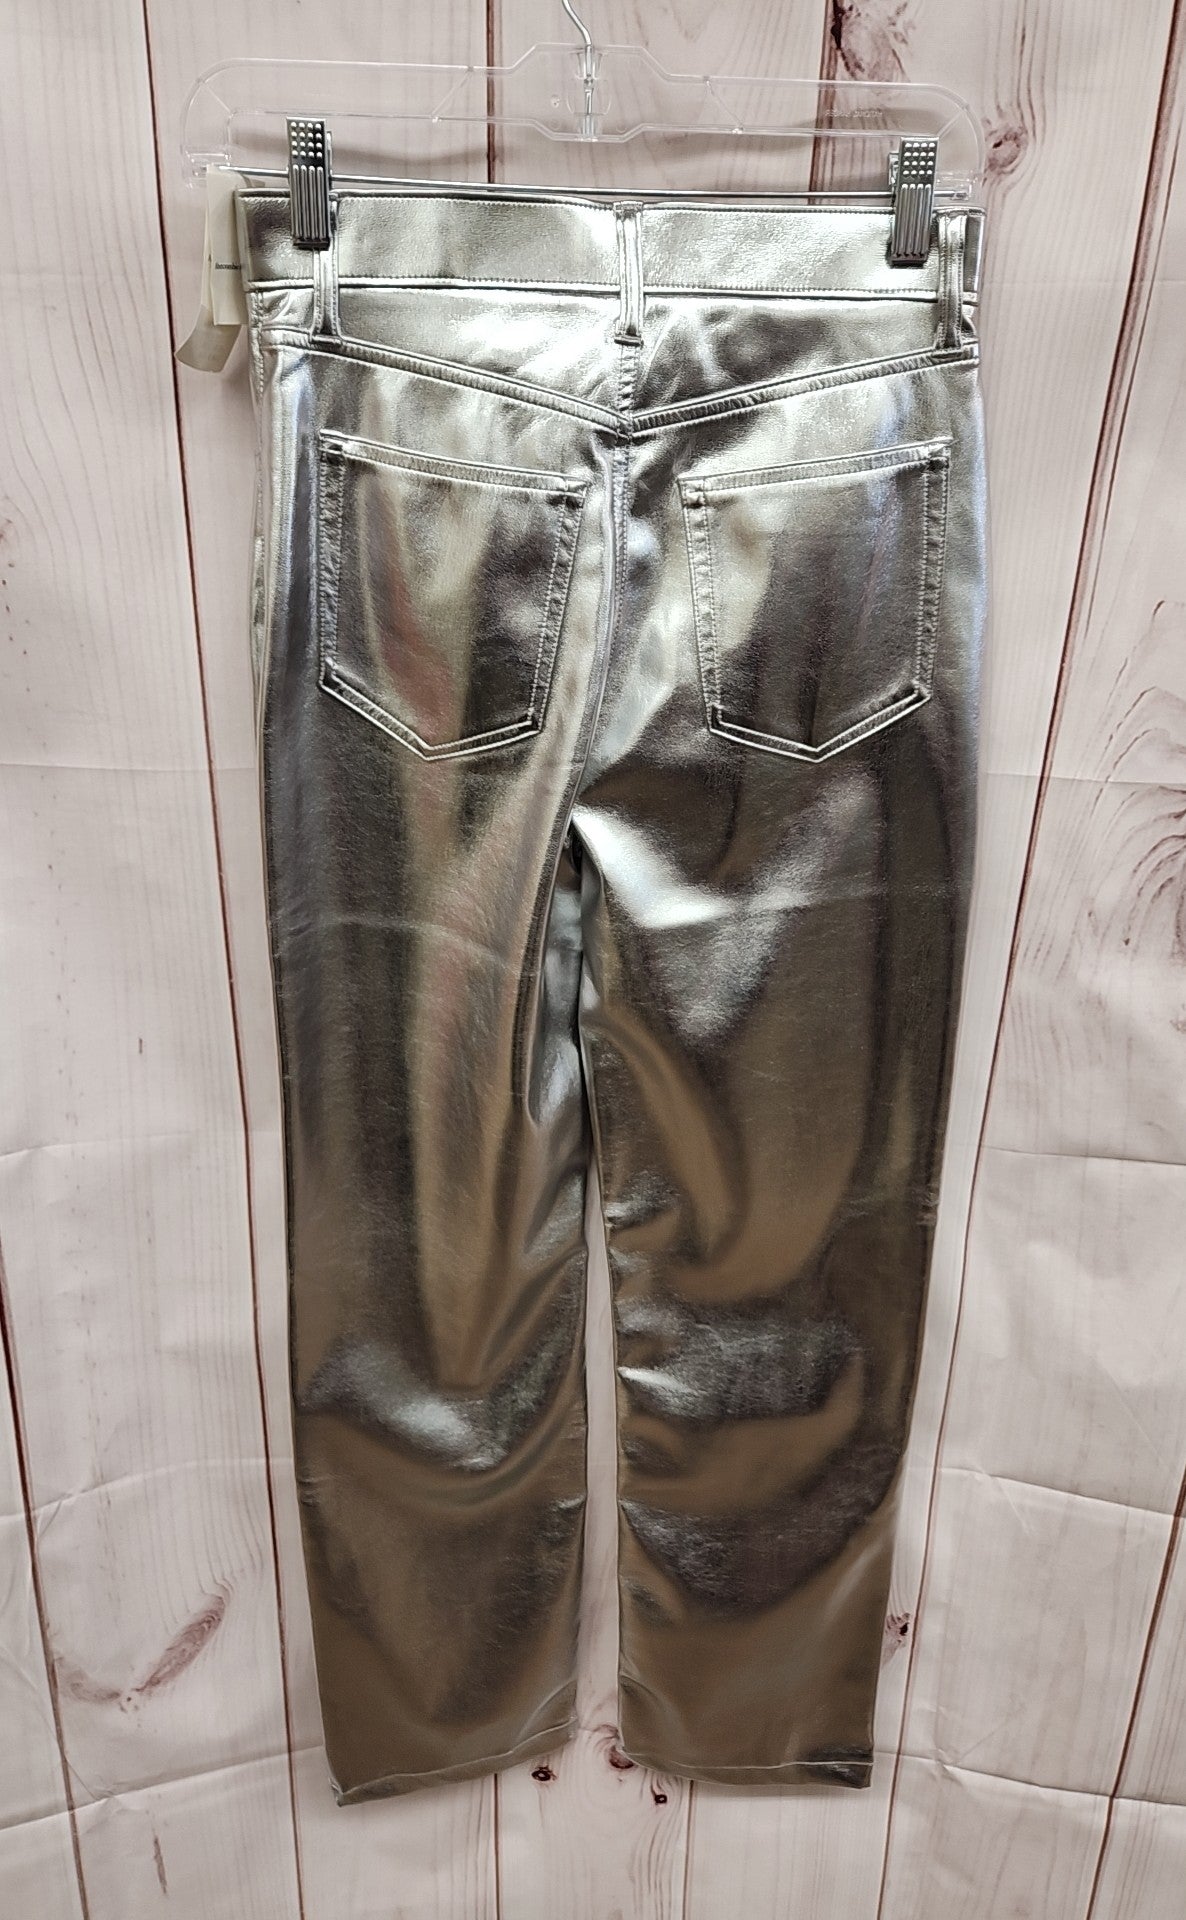 Abercrombie & Fitch Women's Size 25 (0) The '90s Straight Silver Pants